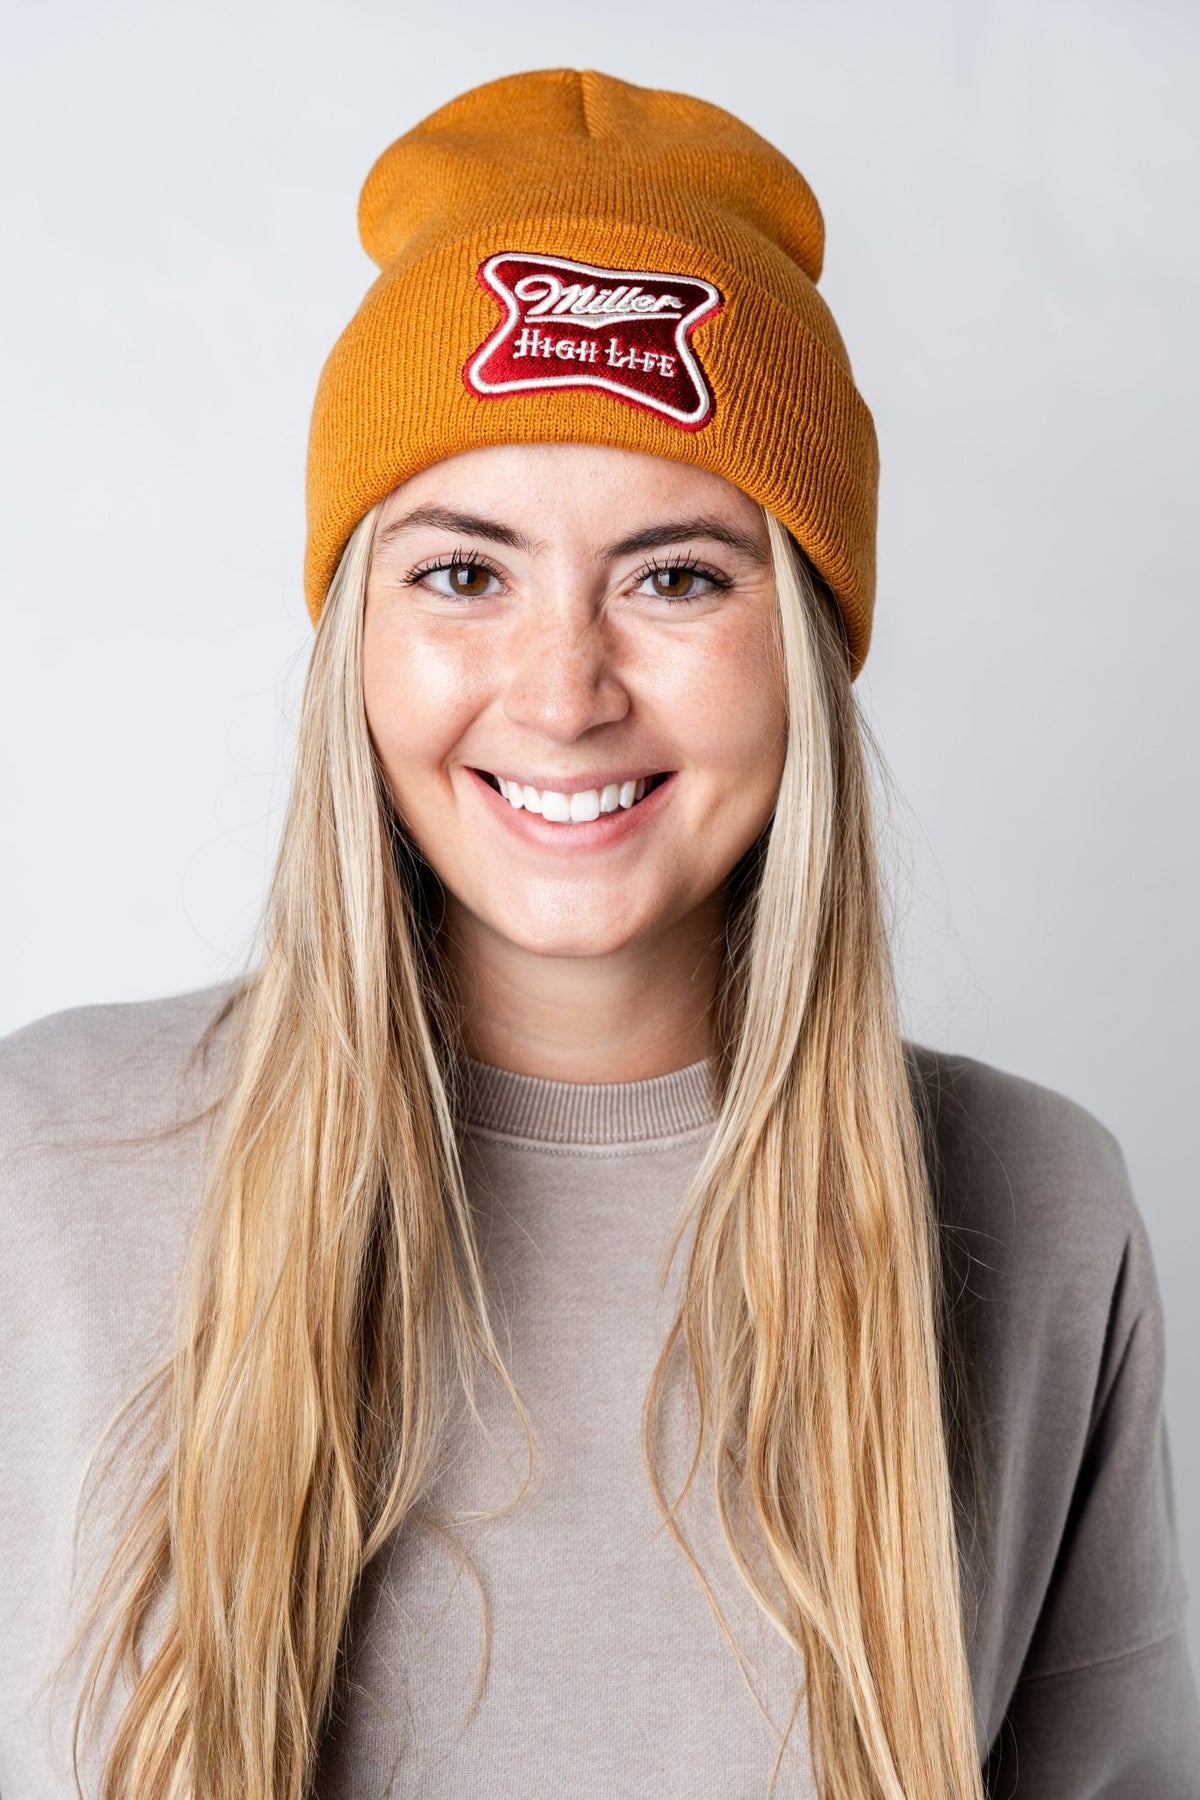 Miller high life cuffed knit beanie hazel - Trendy Gifts at Lush Fashion Lounge Boutique in Oklahoma City